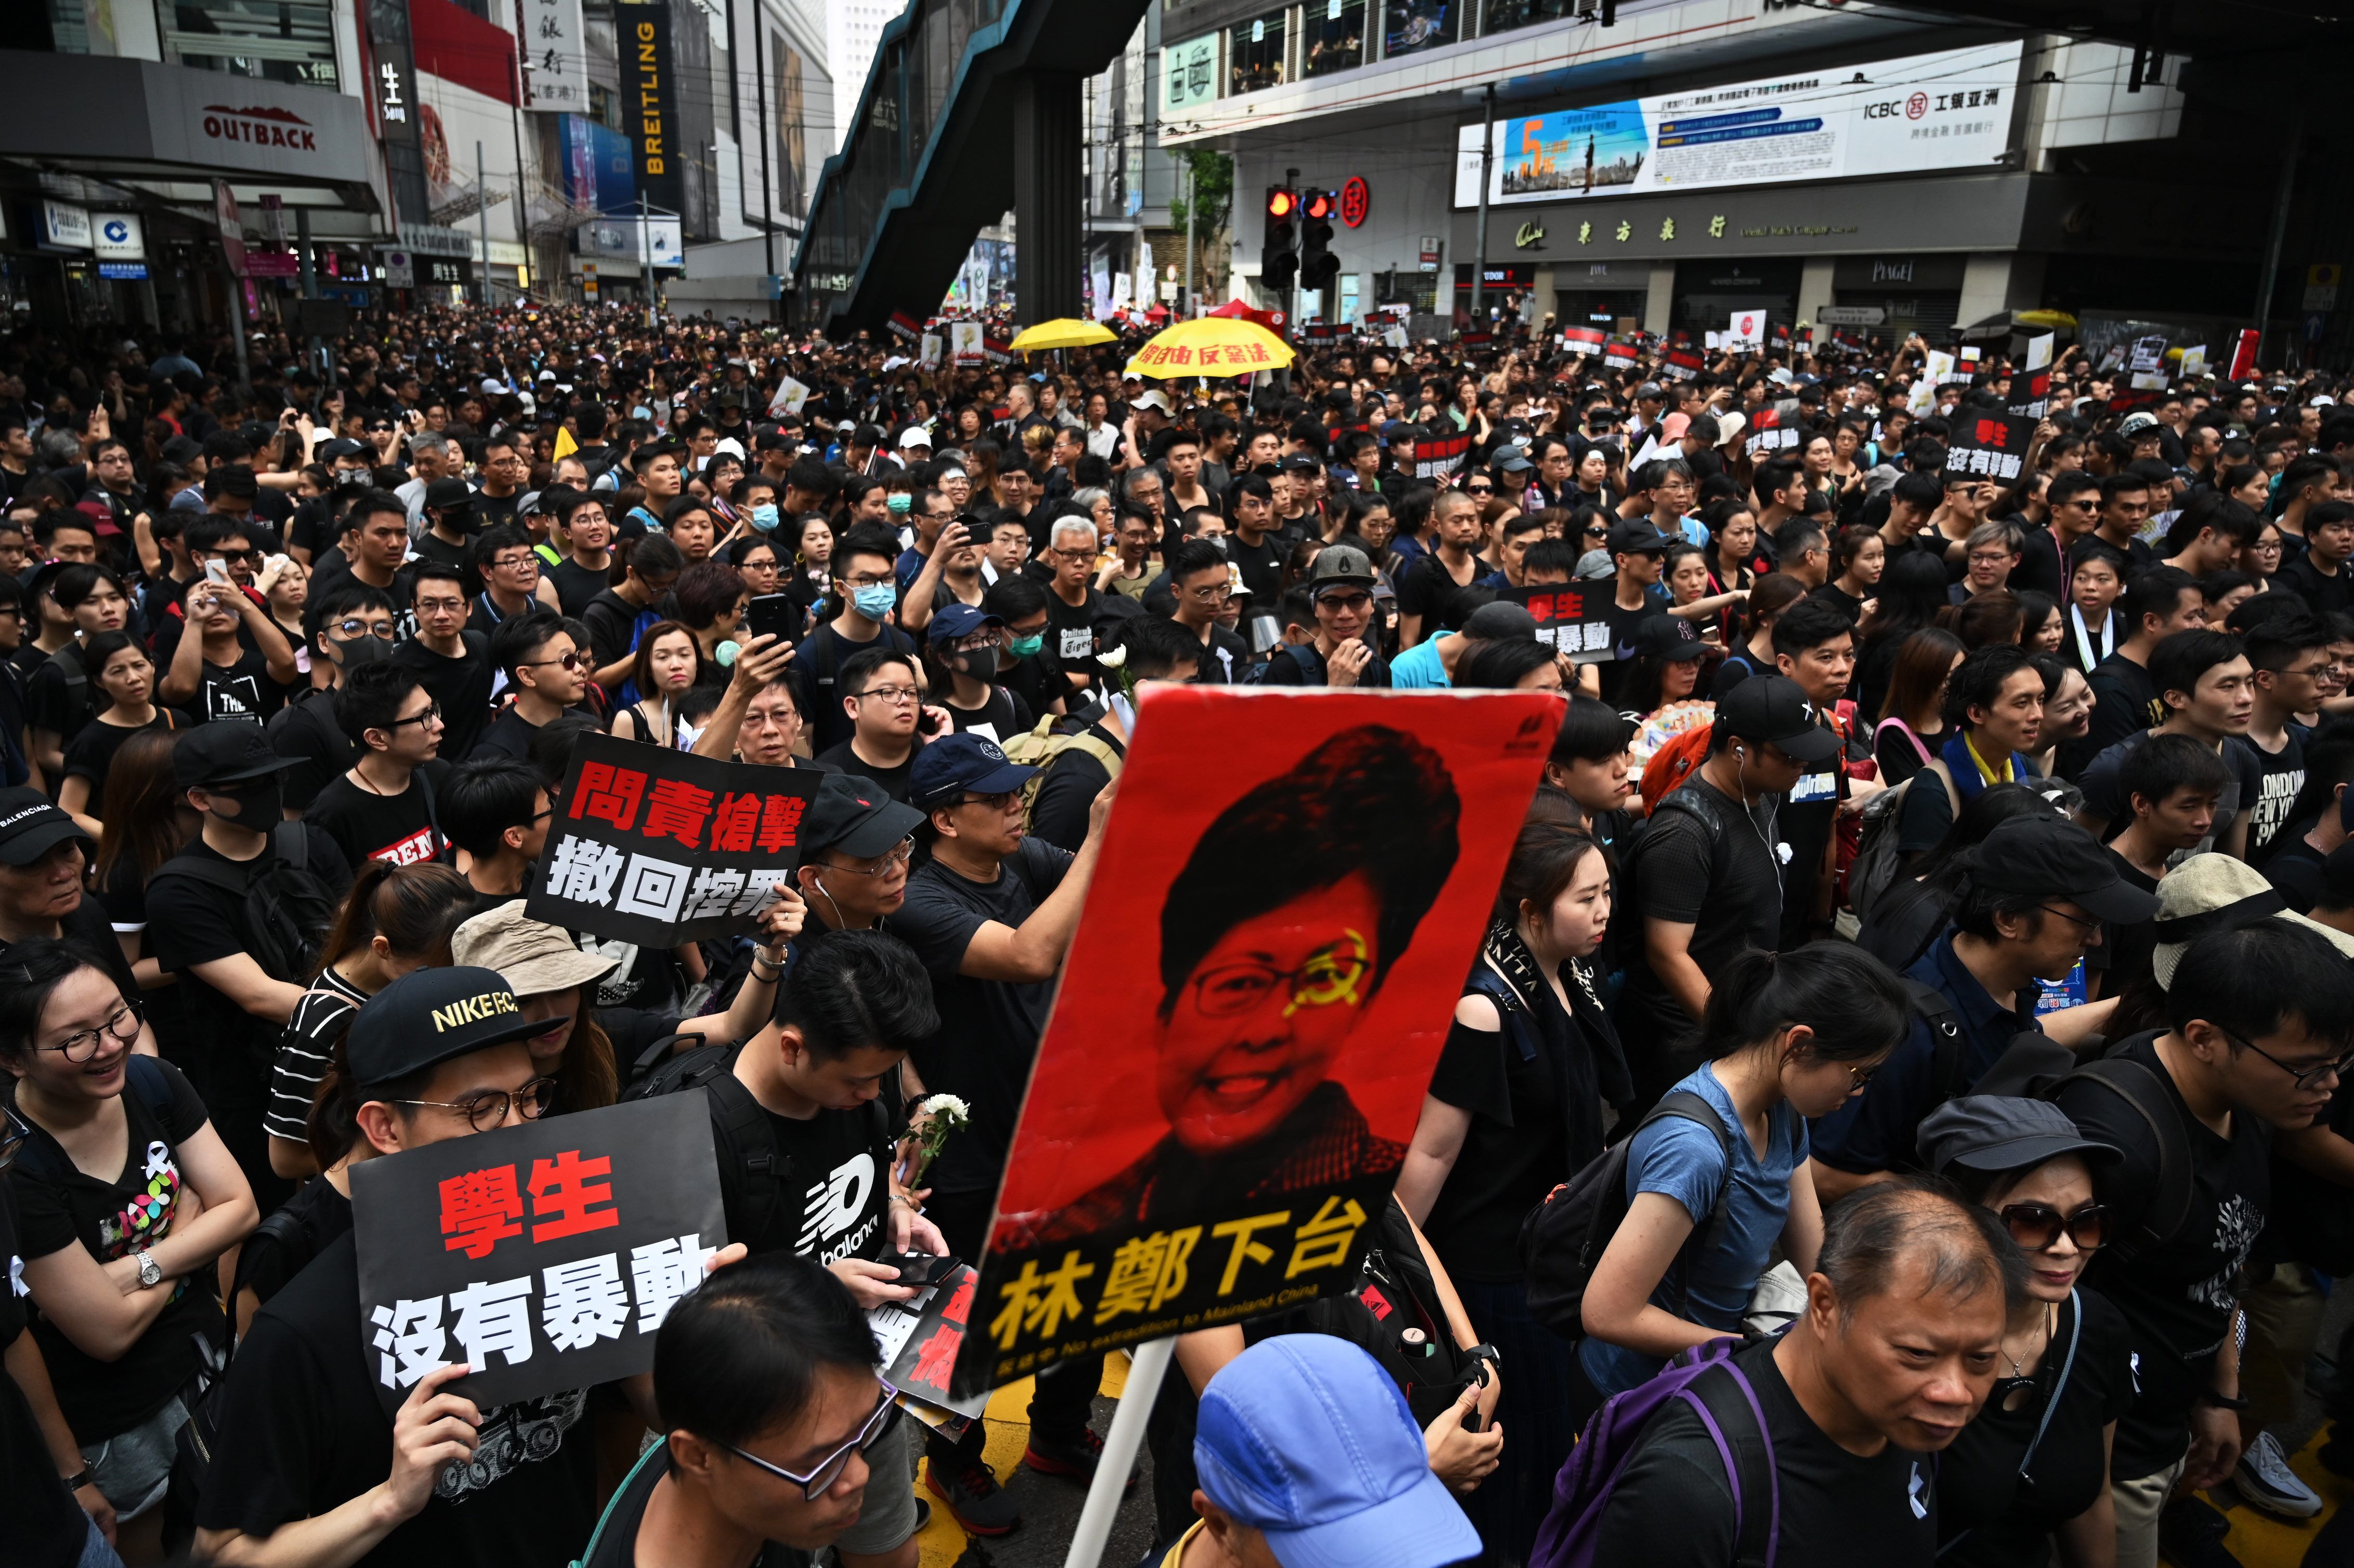 A placard (C) with an image of Hong Kong's Chief Executive Carrie Lam is displayed at a rally.